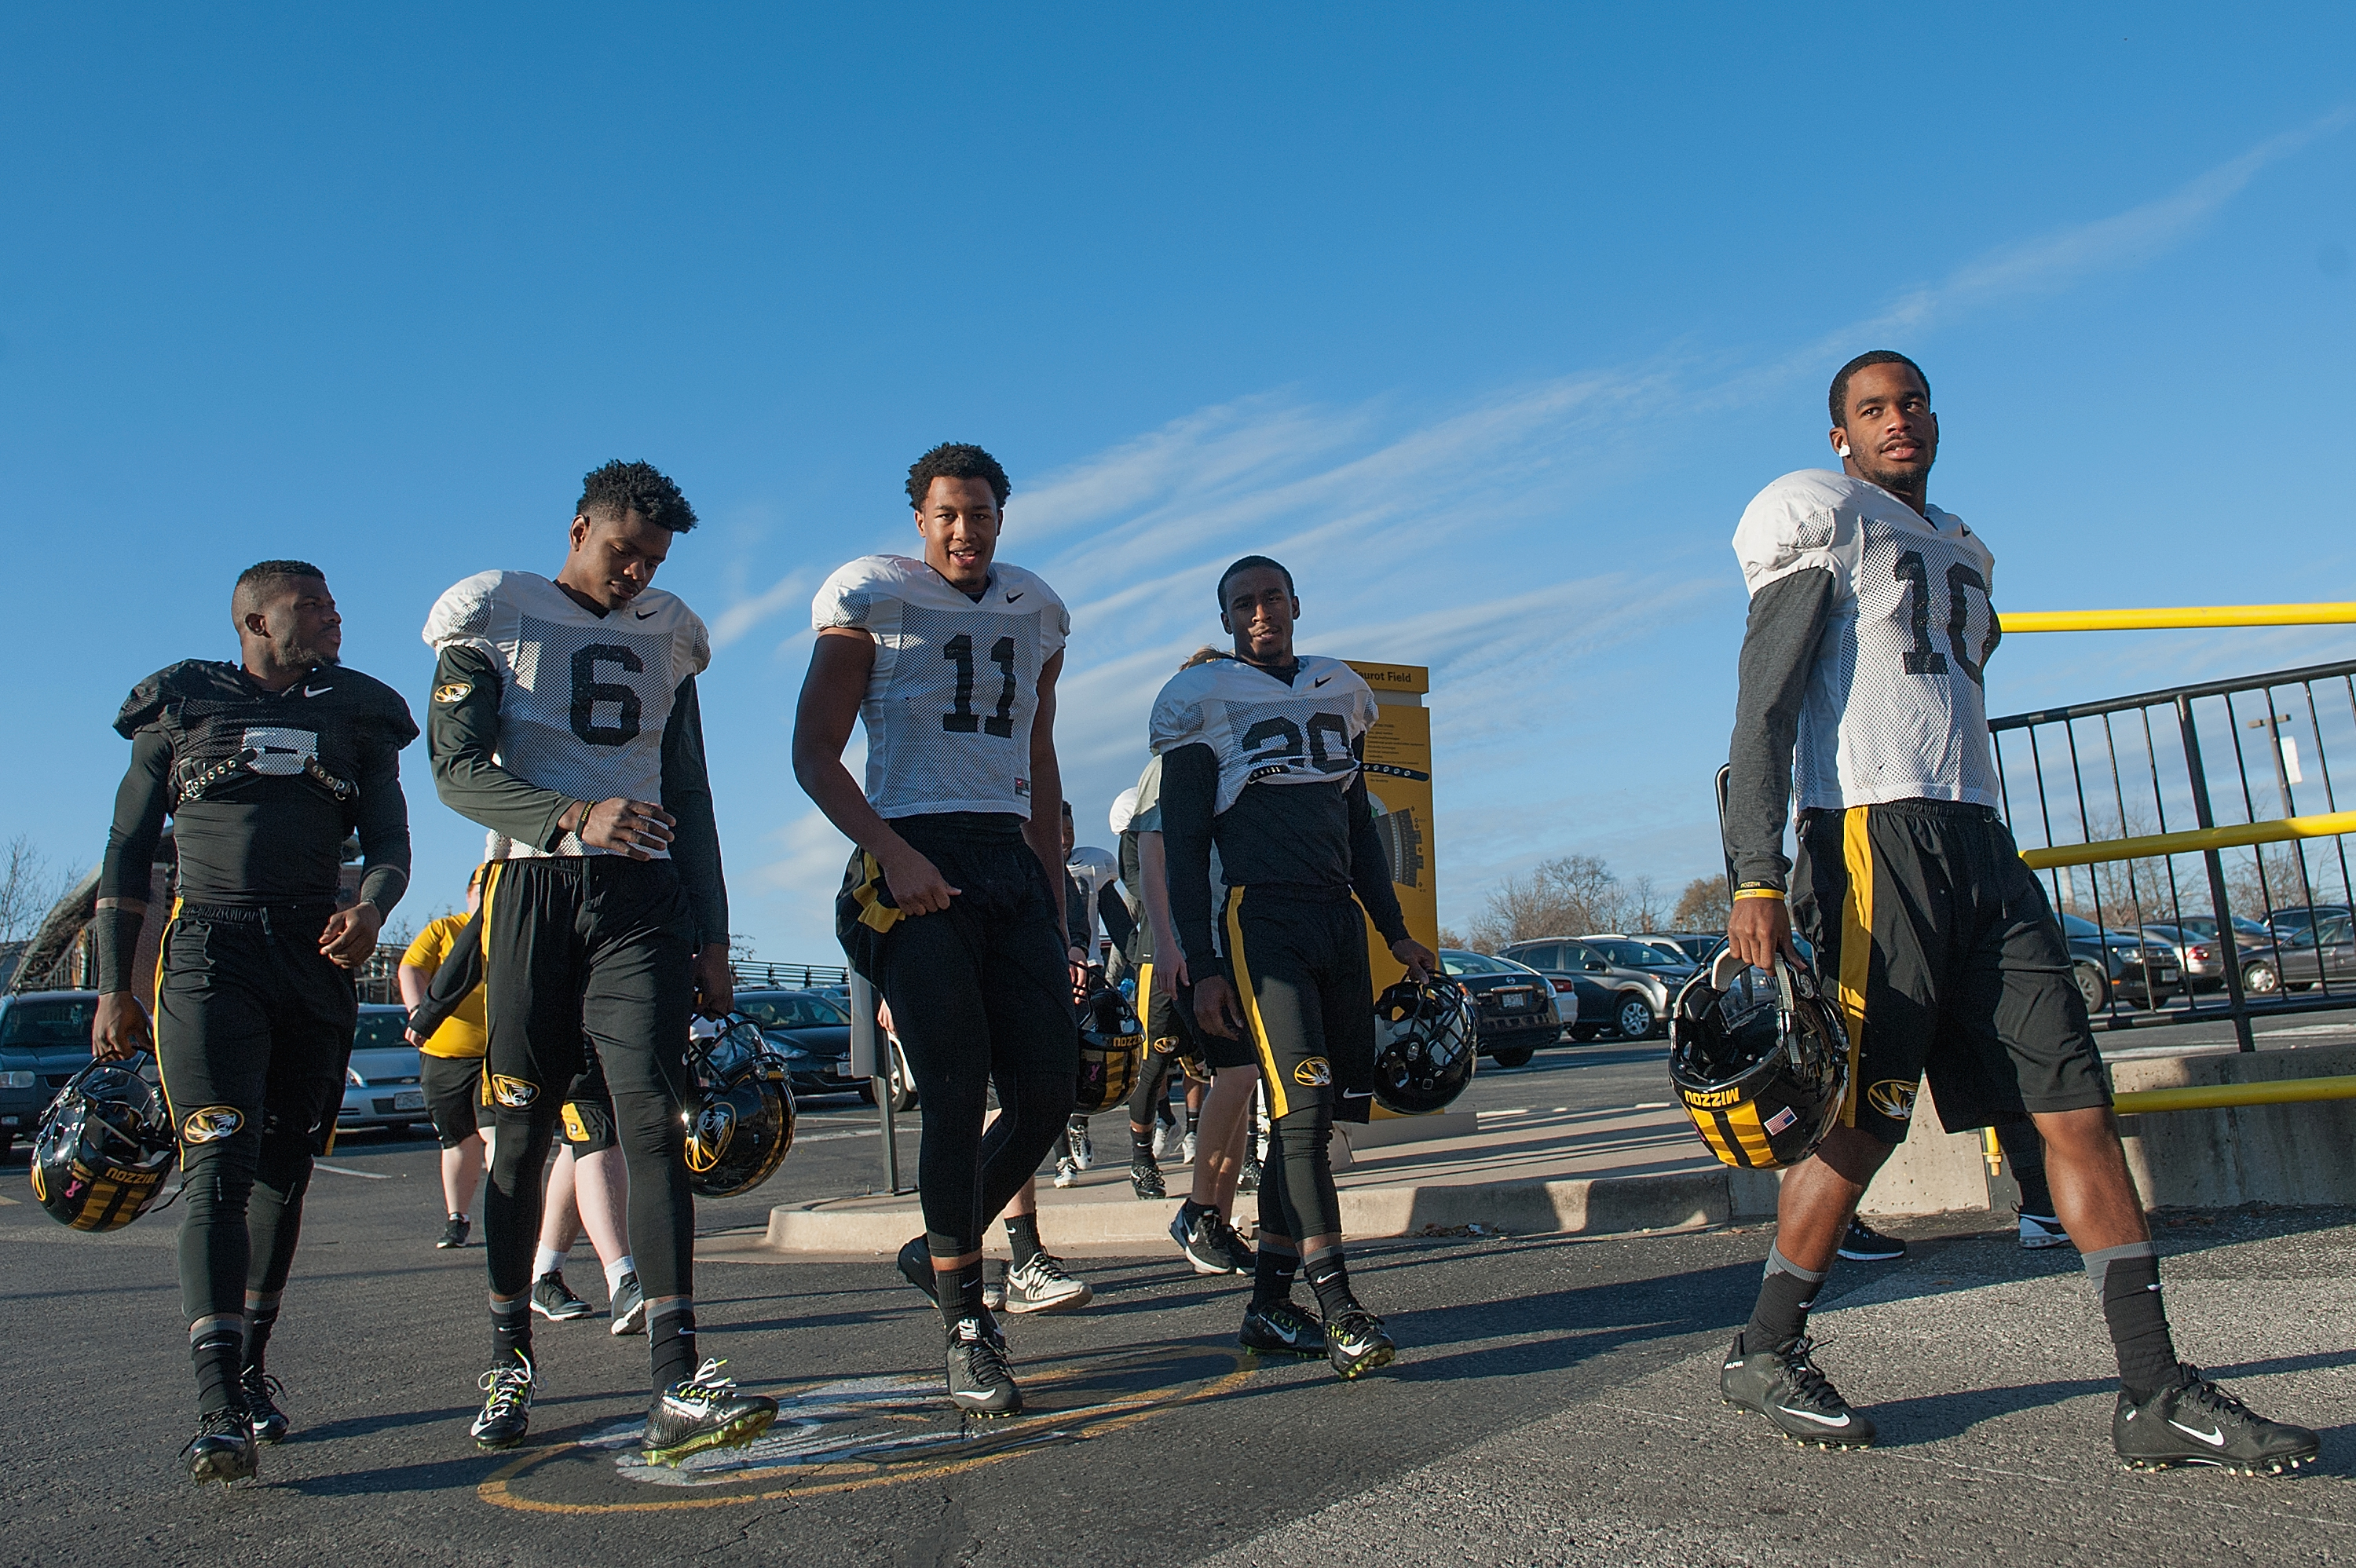 Members of the University of Missouri Tigers Football Team return to practice at Memorial Stadium at Faurot Field in Columbia, Mo. on Nov. 10, 2015. (Michael B. Thomas—Getty Images)